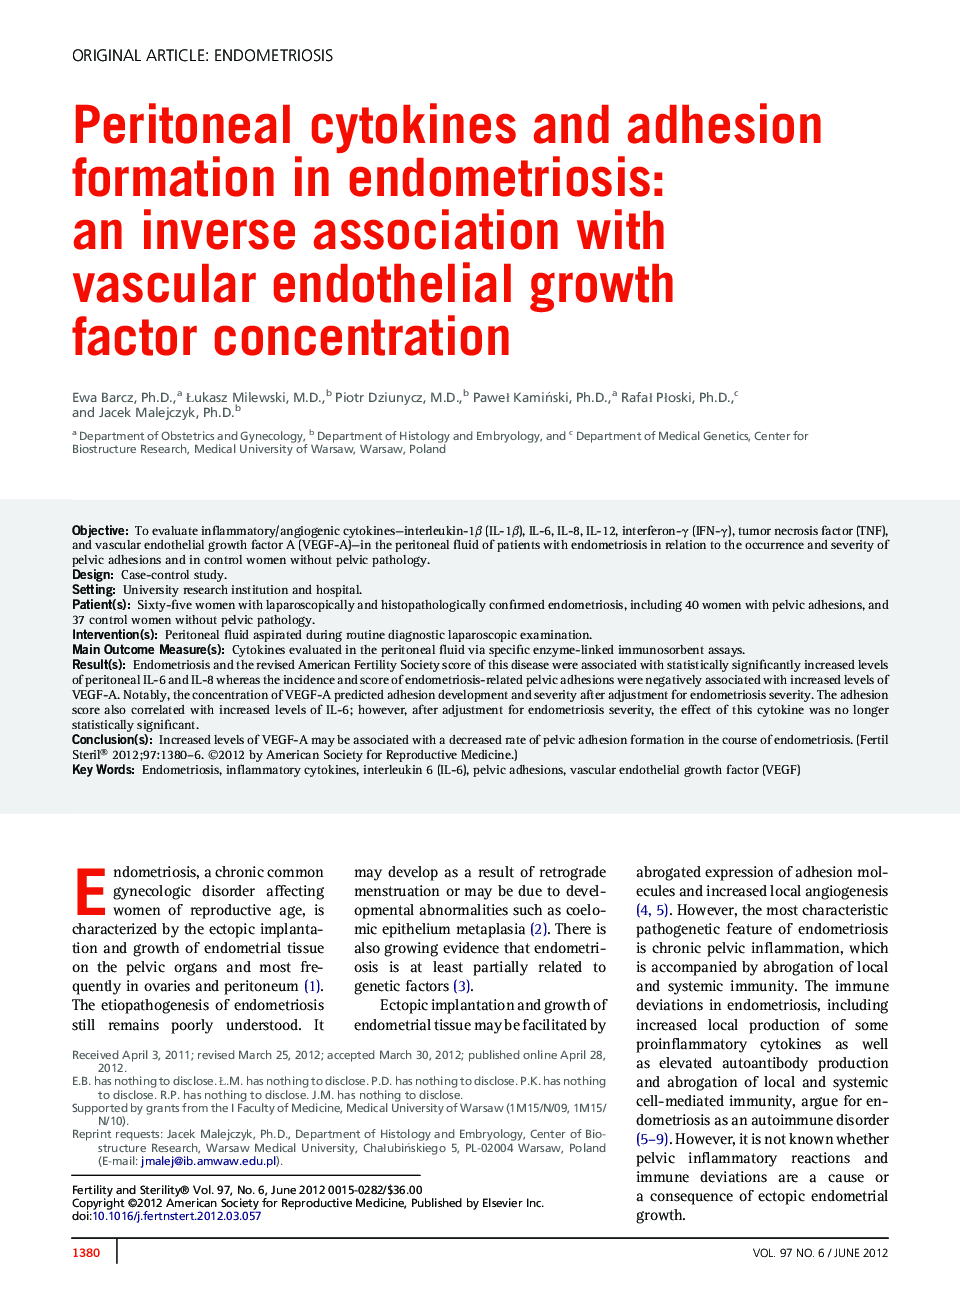 Peritoneal cytokines and adhesion formation in endometriosis: anÂ inverse association with vascularÂ endothelial growth factorÂ concentration